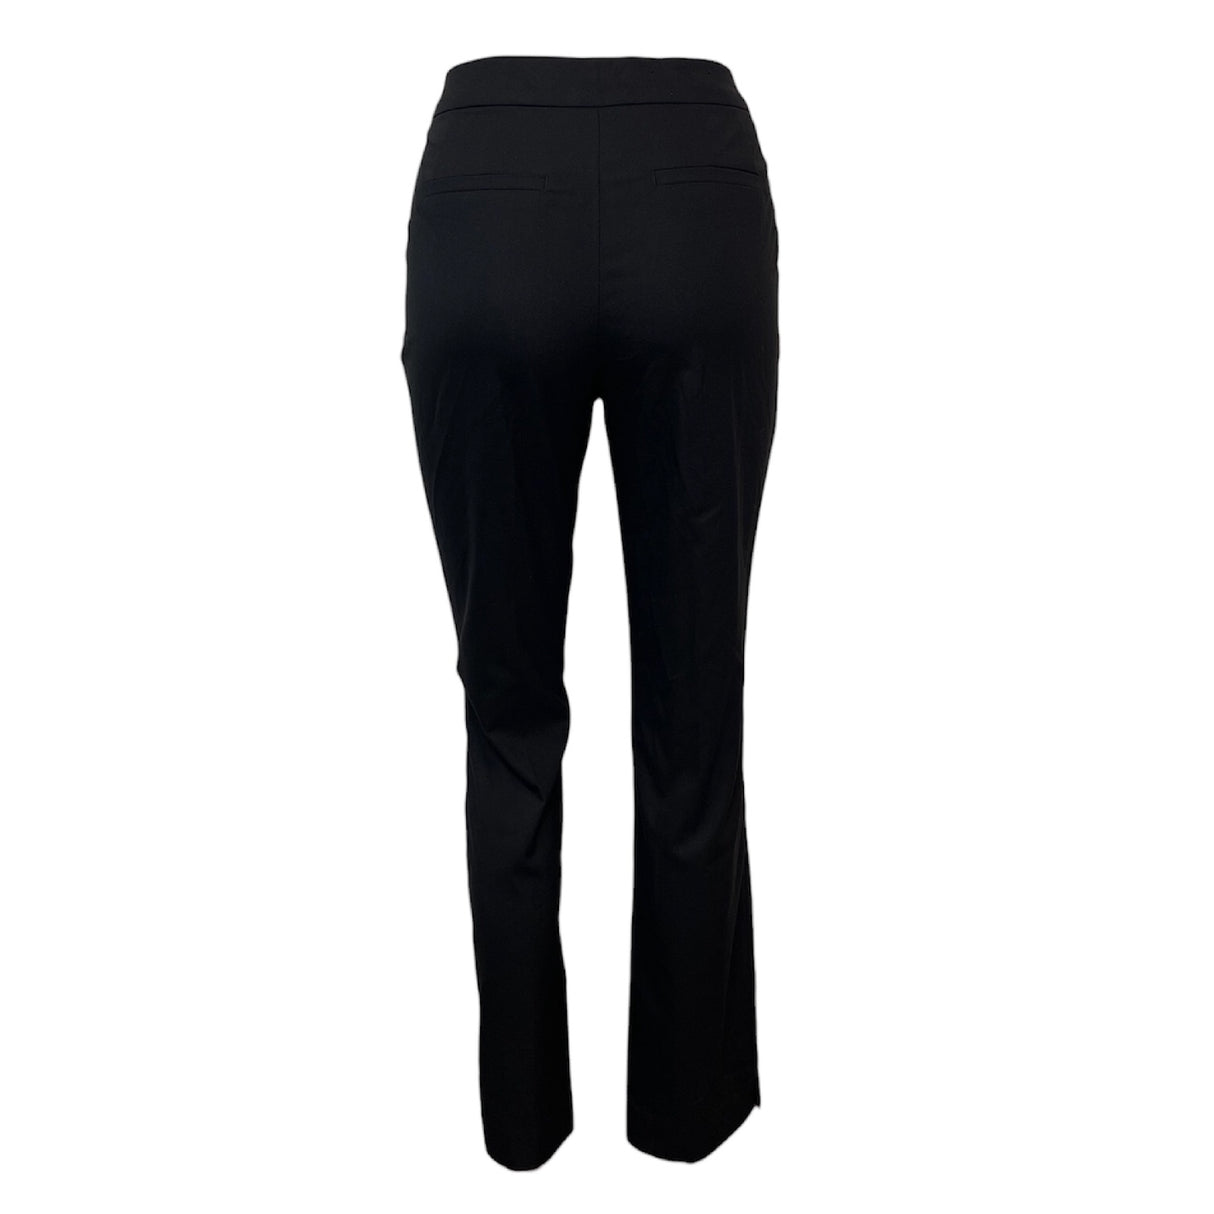 A Second Chance - Betty Barclay S Black Pant Women - Delivery All Over Lebanon